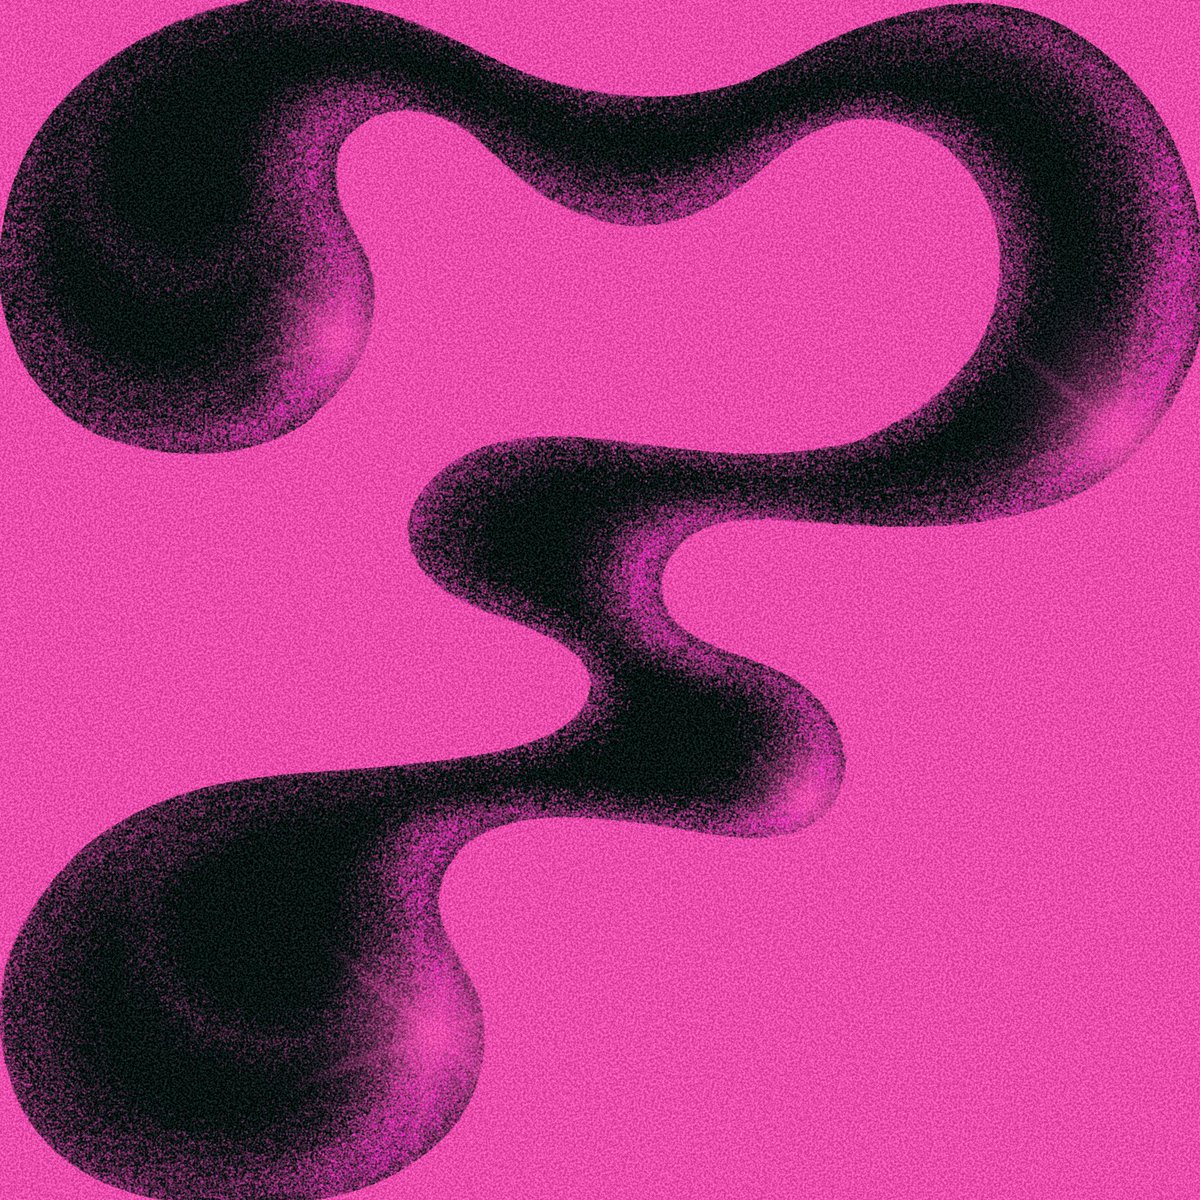 Day 34: Number 7 💫
.
Made in @Procreate
@36daysoftype 
#36daysoftype #36daysoftype10 #36days #36dot #36days_7 #36daysoftype_7 #Procreate #procreateart #procreateartist #Apple #art #typography